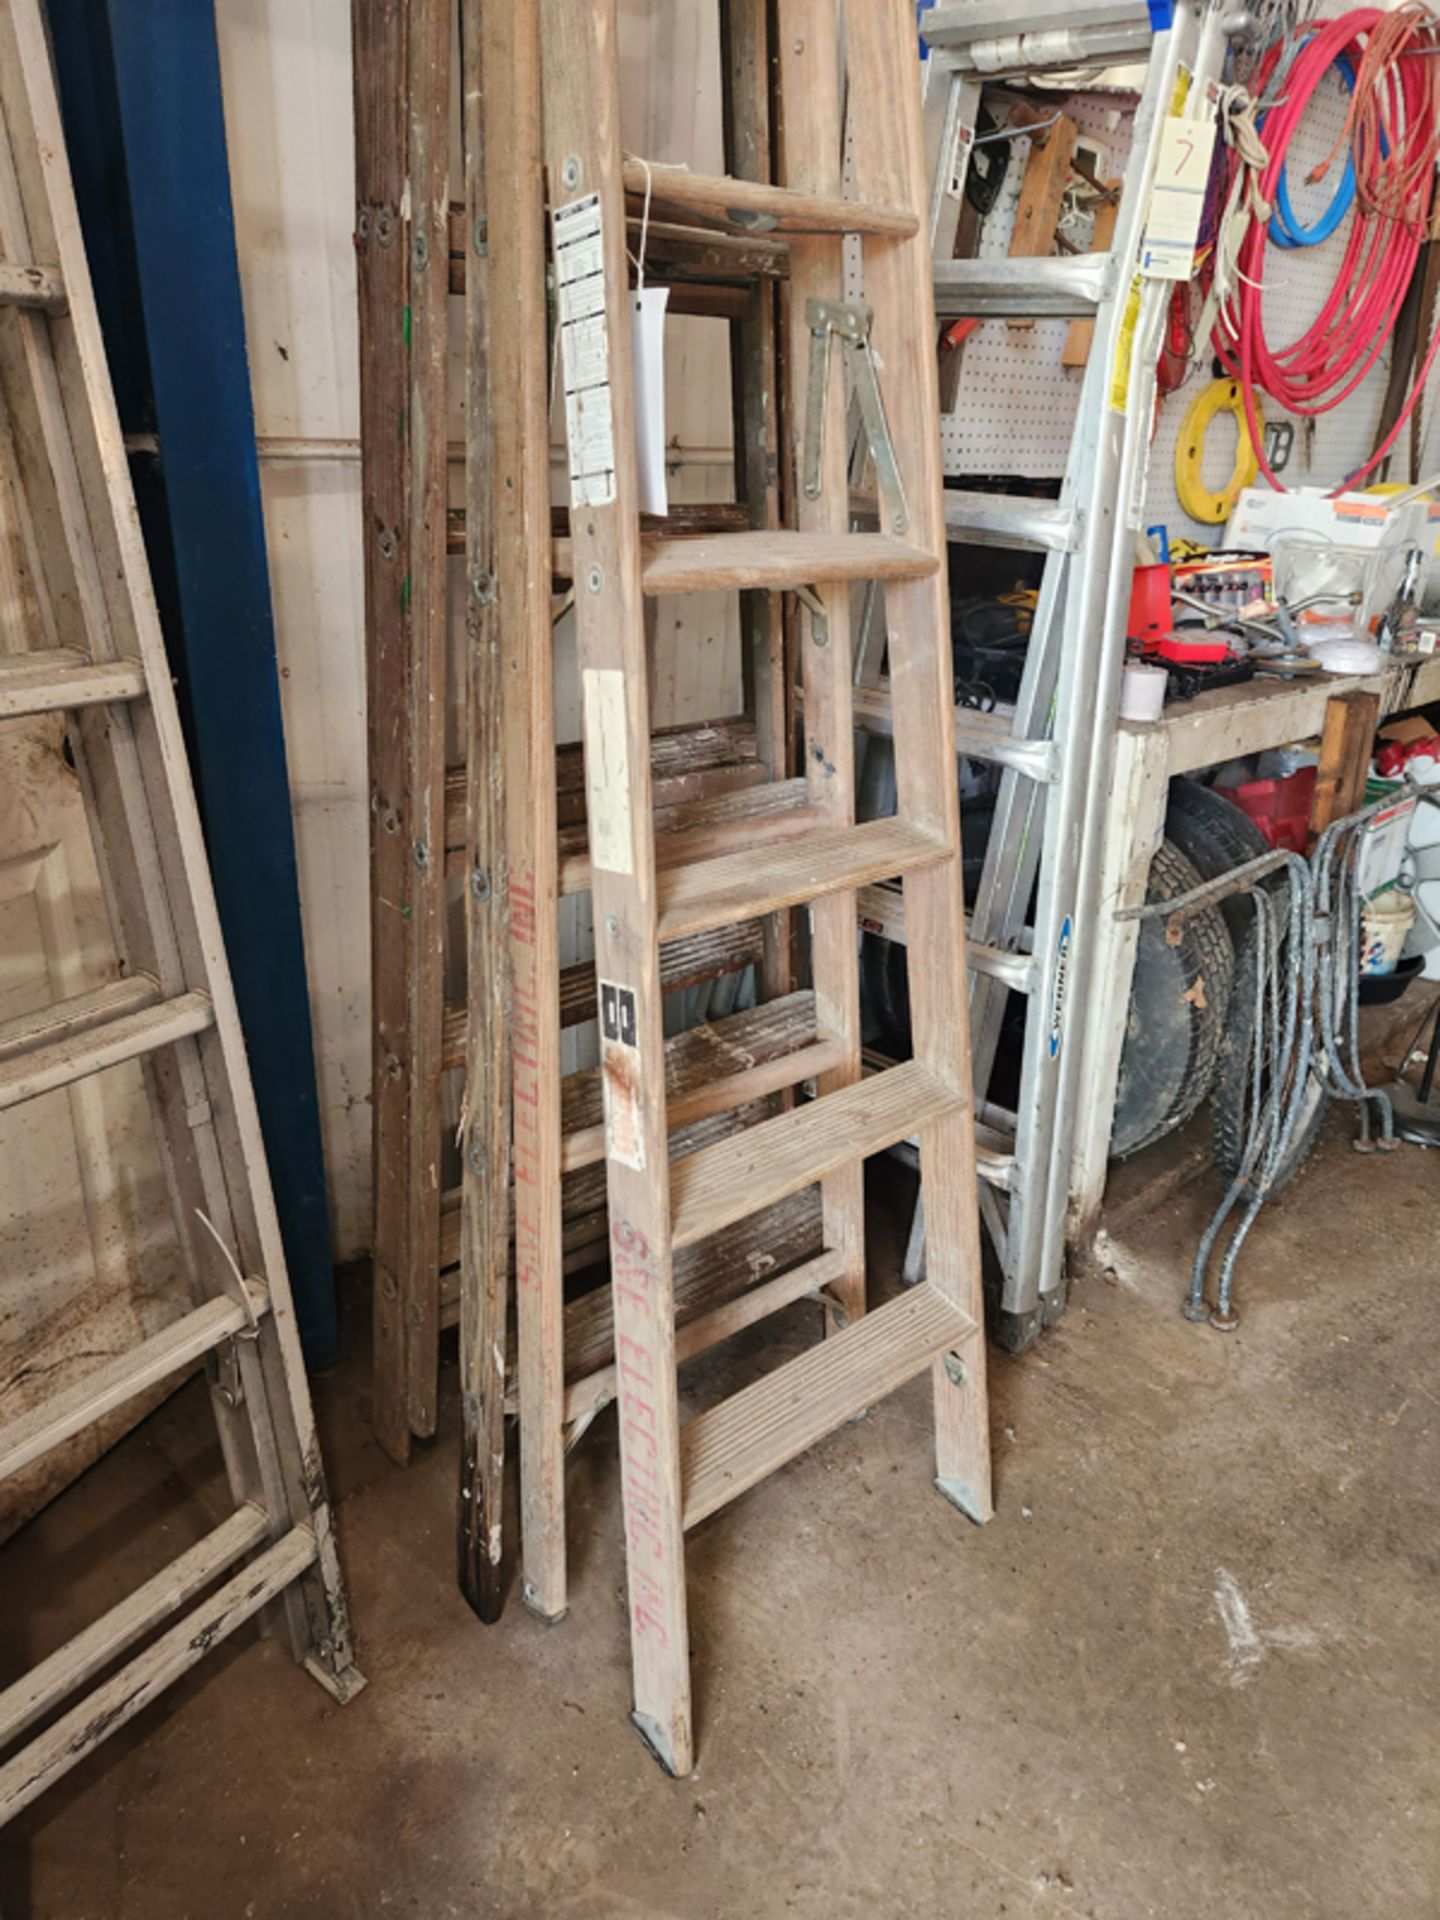 SET OF 3 WOODEN LADDERS - 6', 8' AND 10' - Image 2 of 3